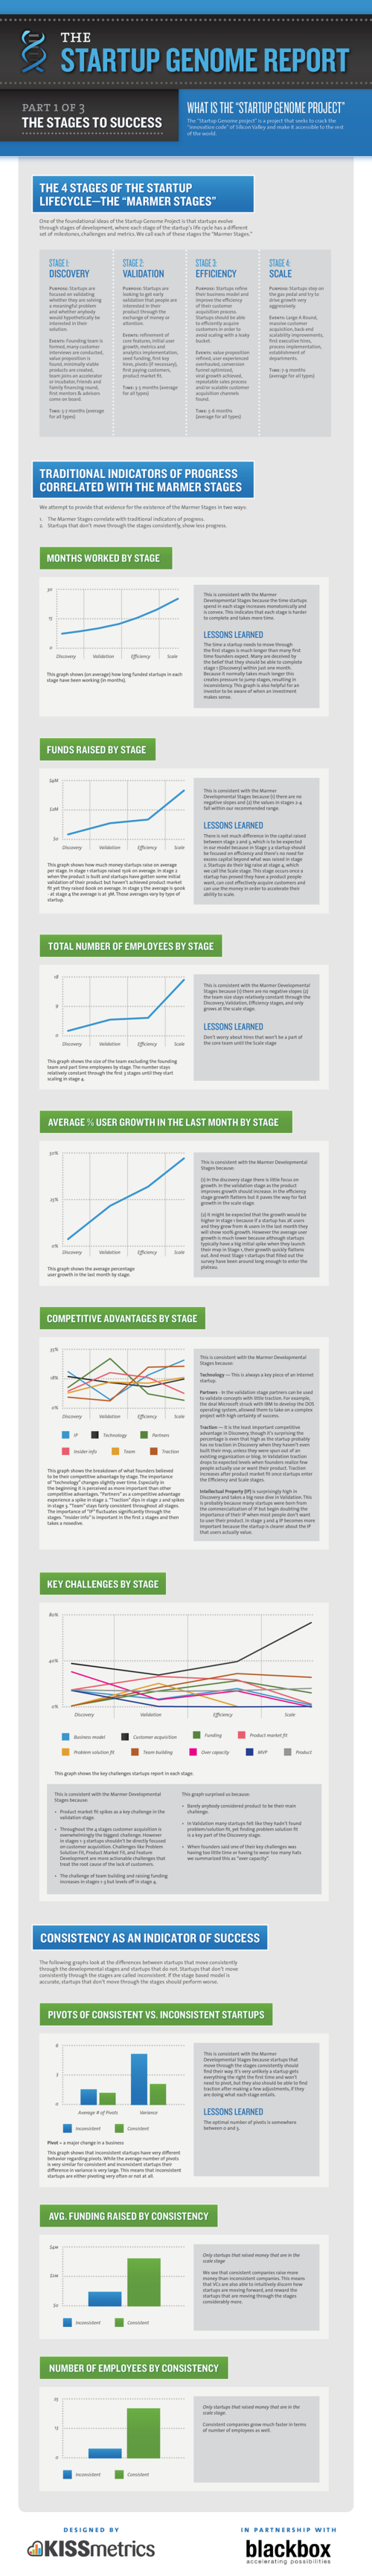 Infographic_by_kissmetrics_for_startup_genome_report